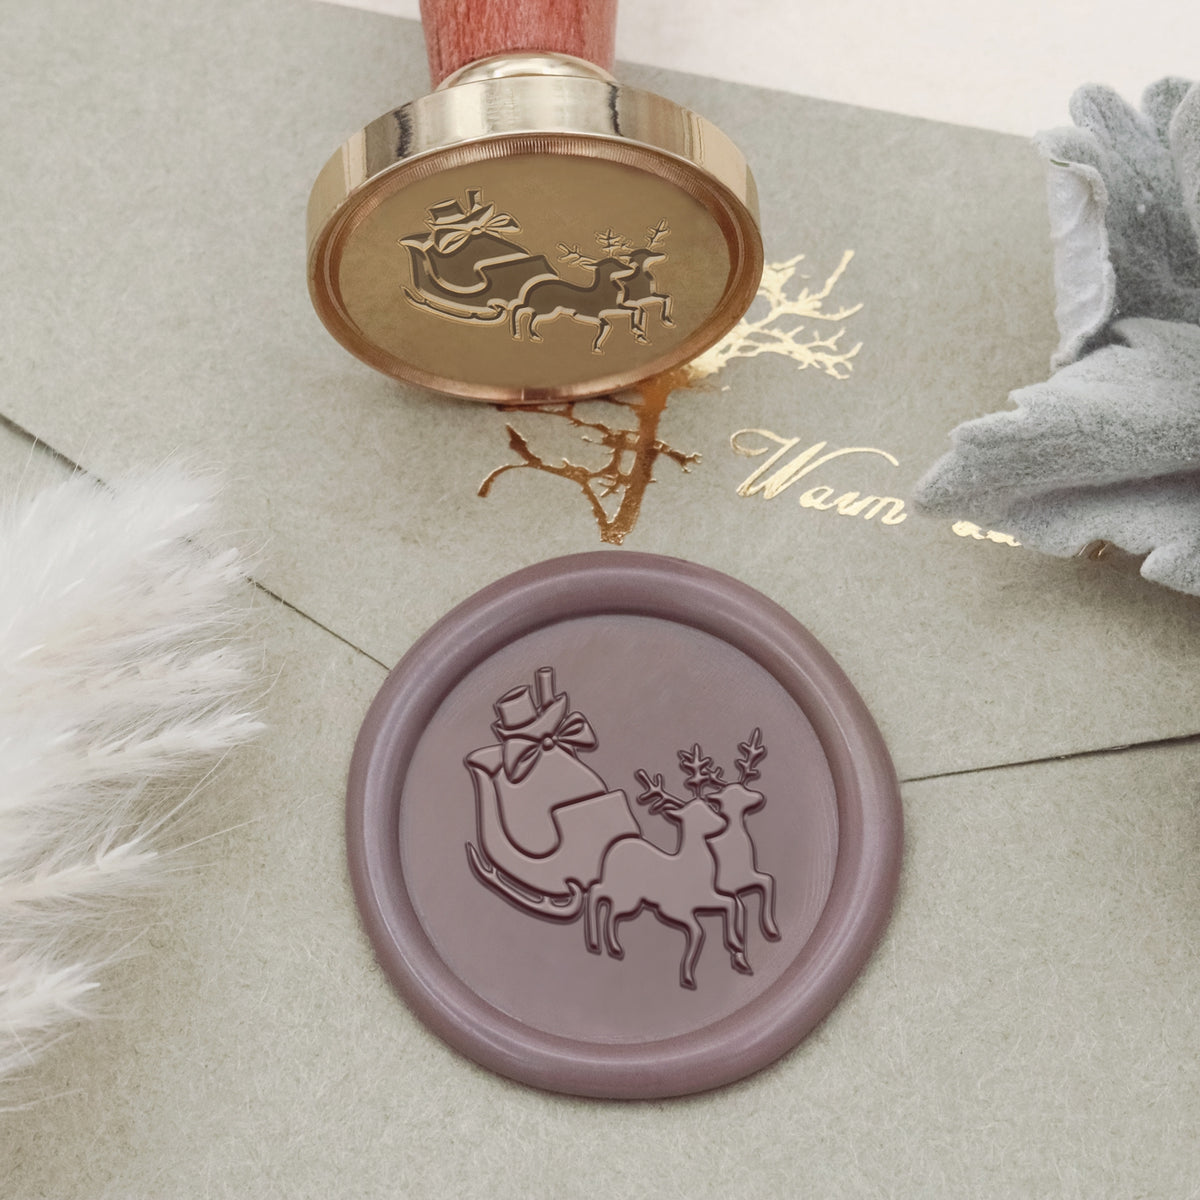 Reindeer-Drawn Sleigh with Gift Wax Seal Stamp